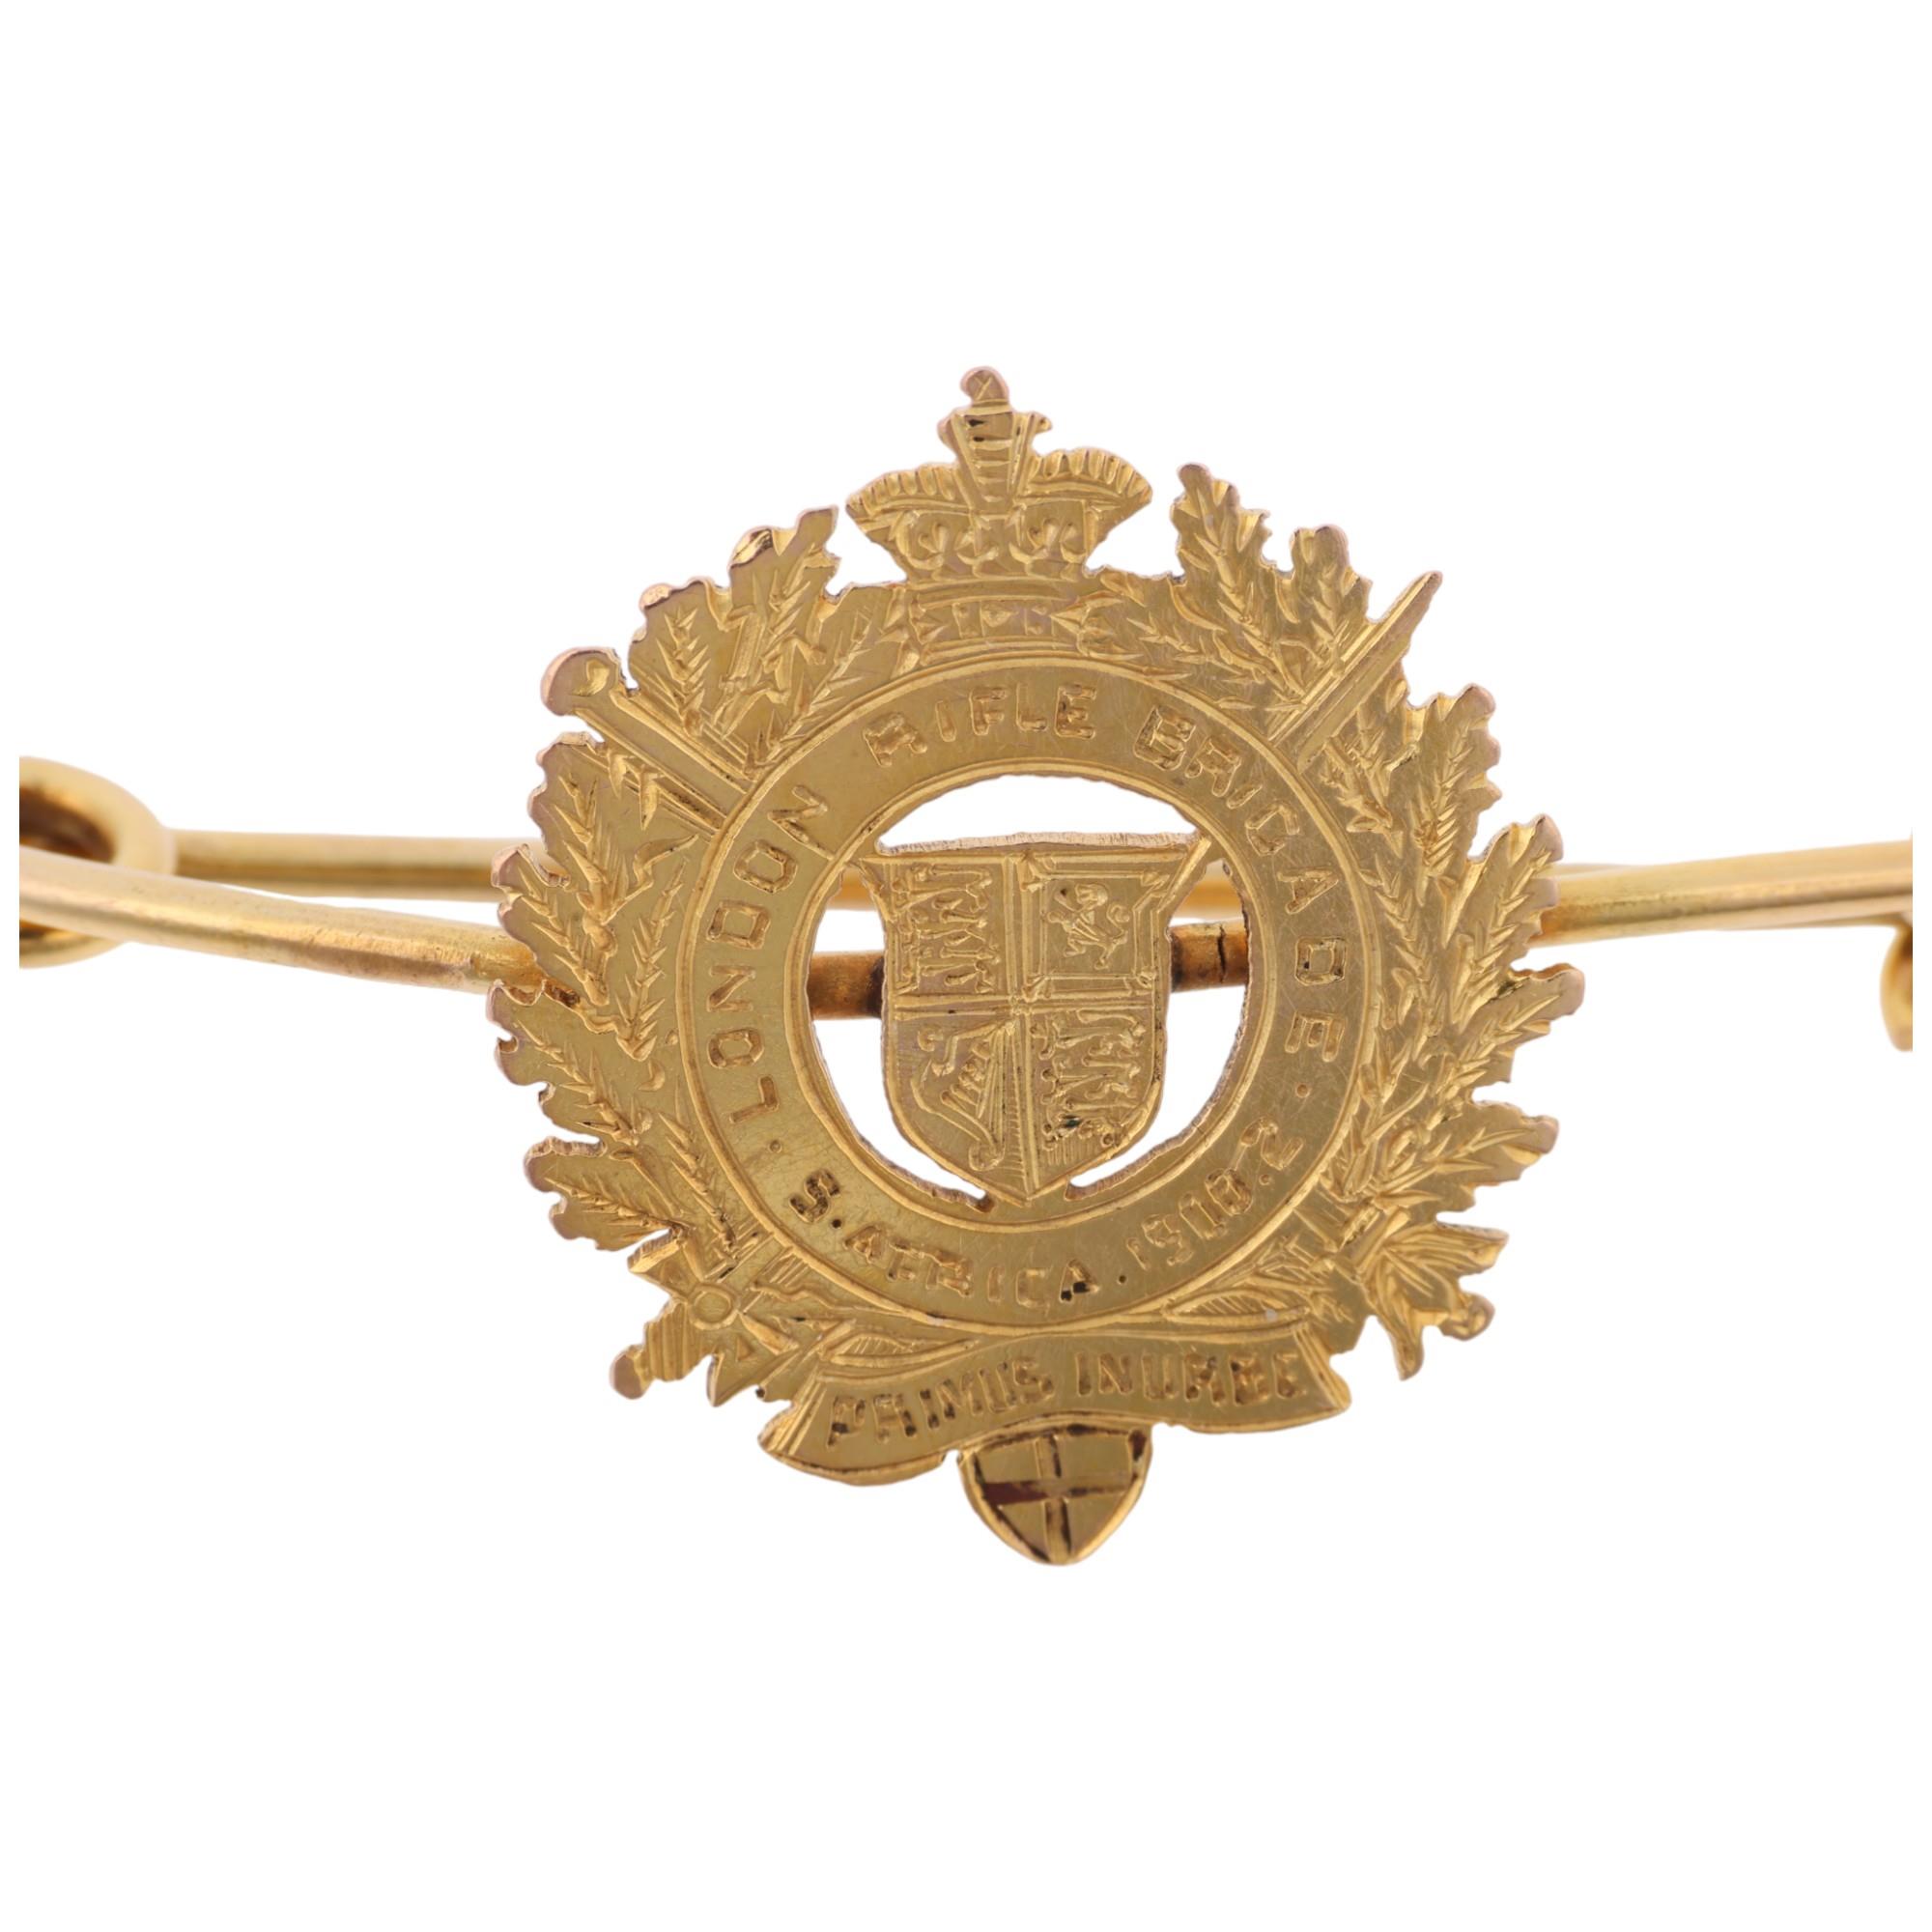 An early 20th century 9ct gold London Rifle Brigade military sweetheart bar brooch, South Africa - Image 2 of 4